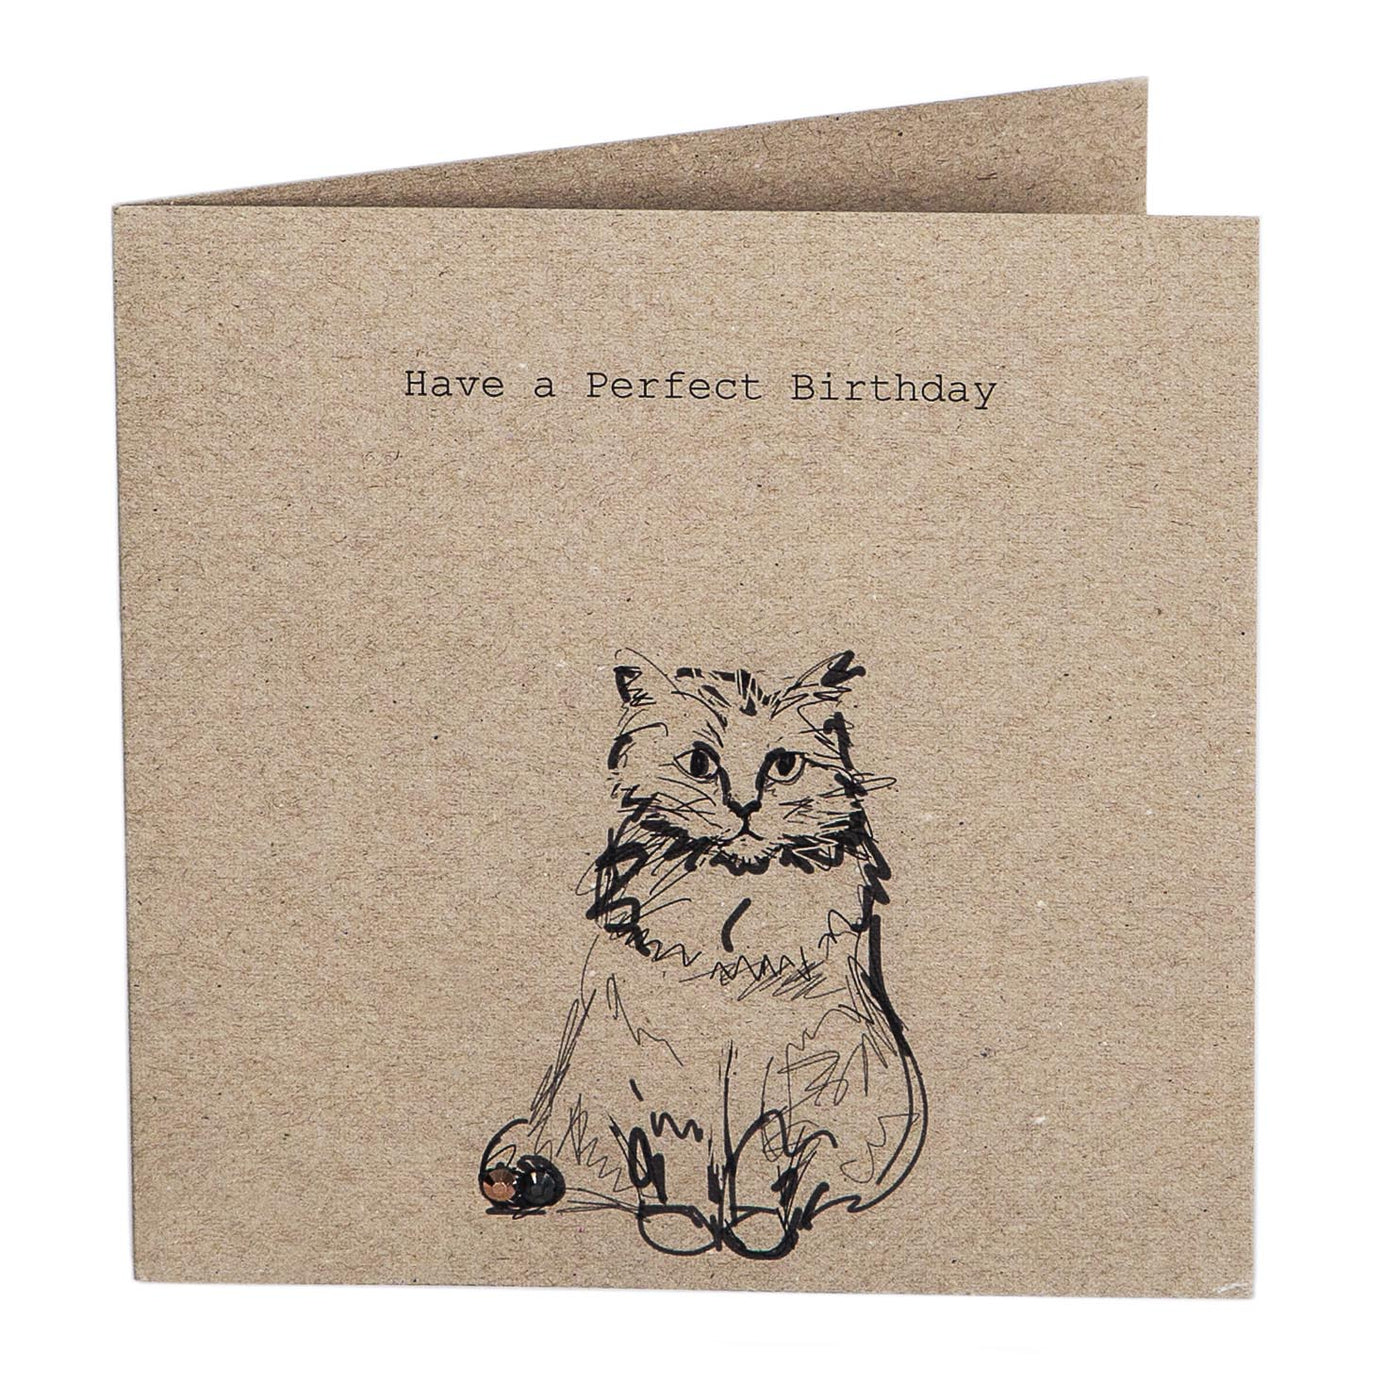 Print Circus Embellished Greetings Card NT09 Happy Birthday (cat) square embellished card